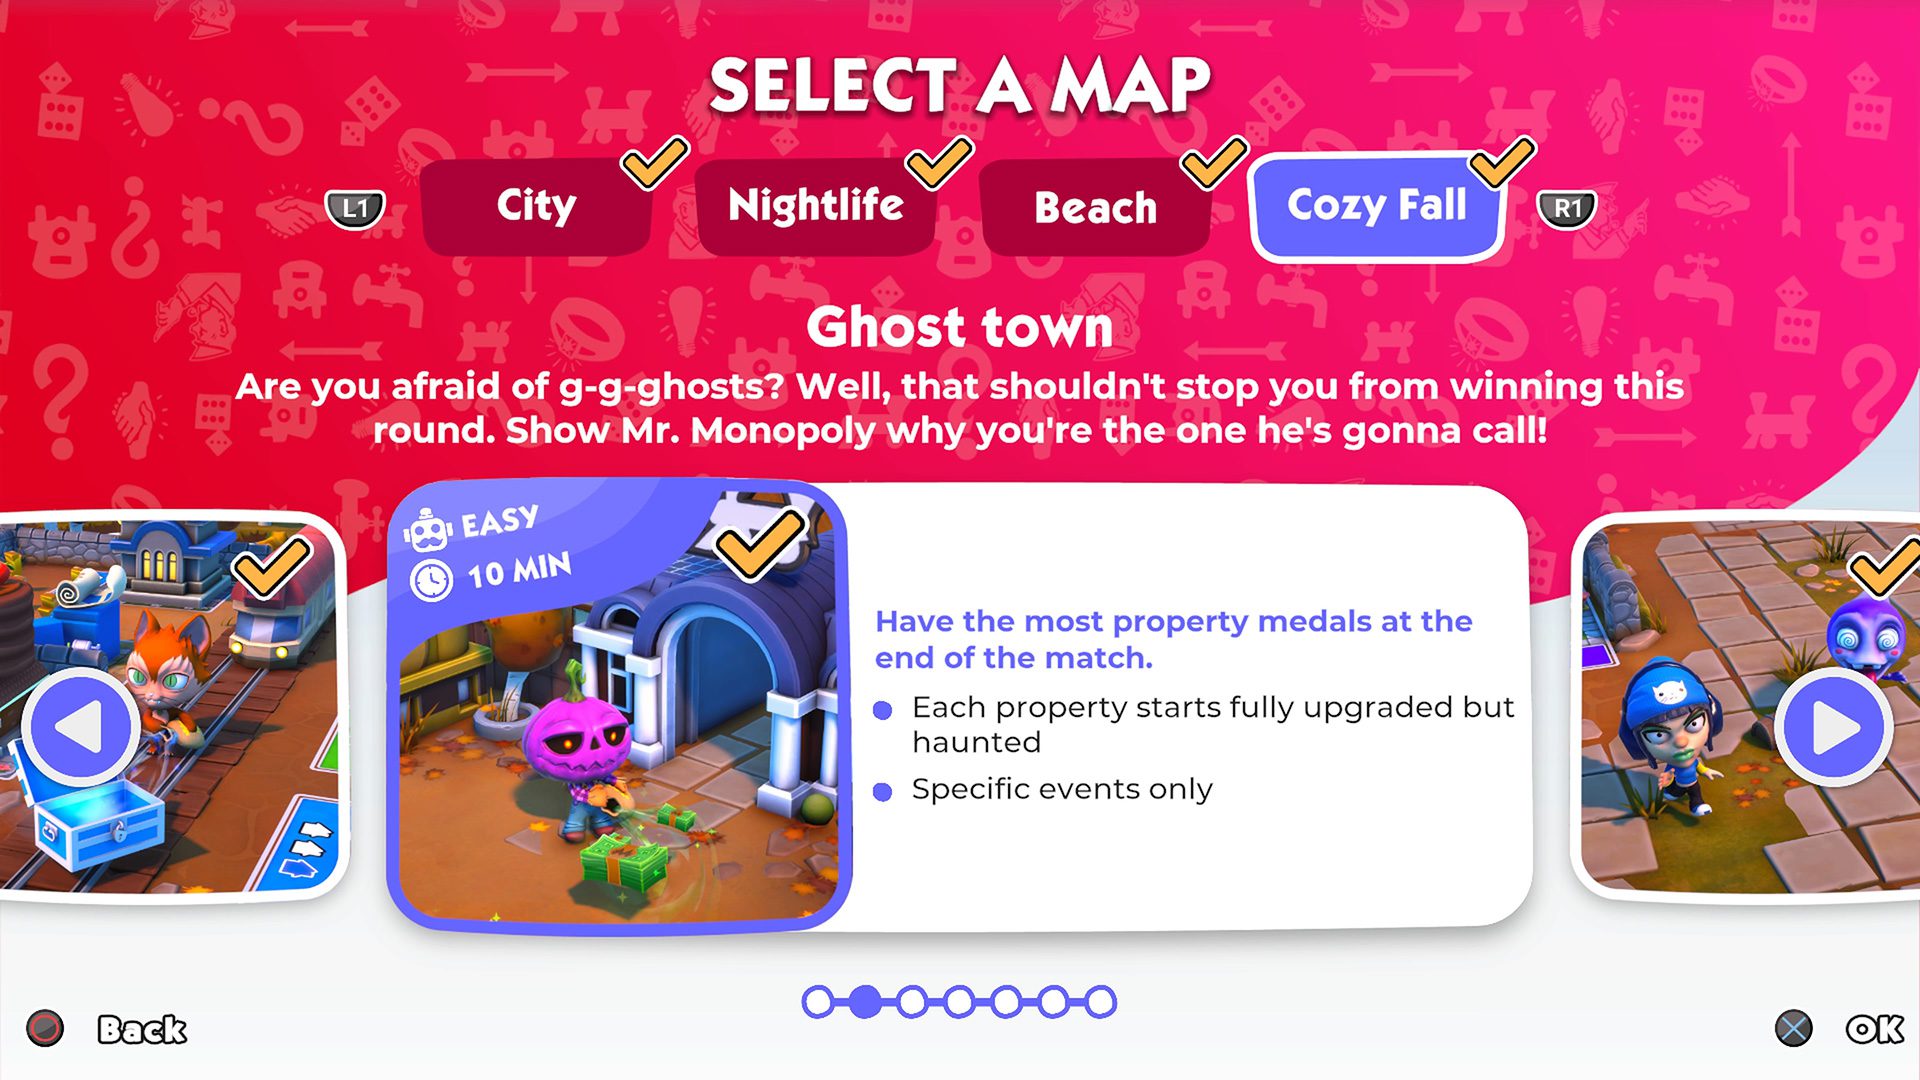 Monopoly Madness has a story mode with City, Nightlife, Beach, and Cozy Fall stages